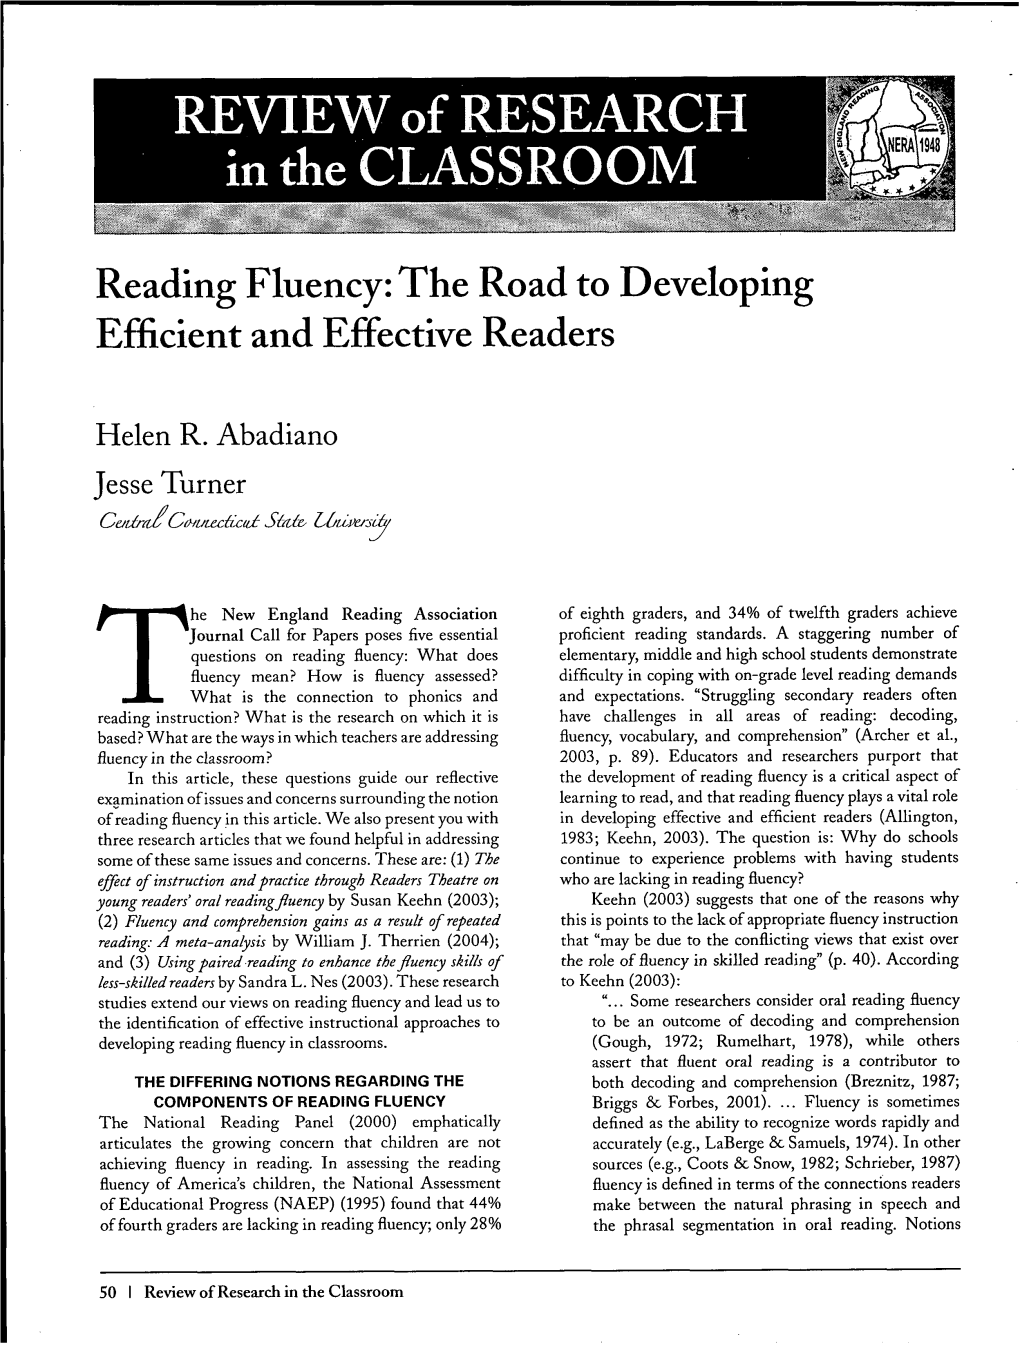 Reading Fluency: the Road to Developing Efficient and Effective Readers